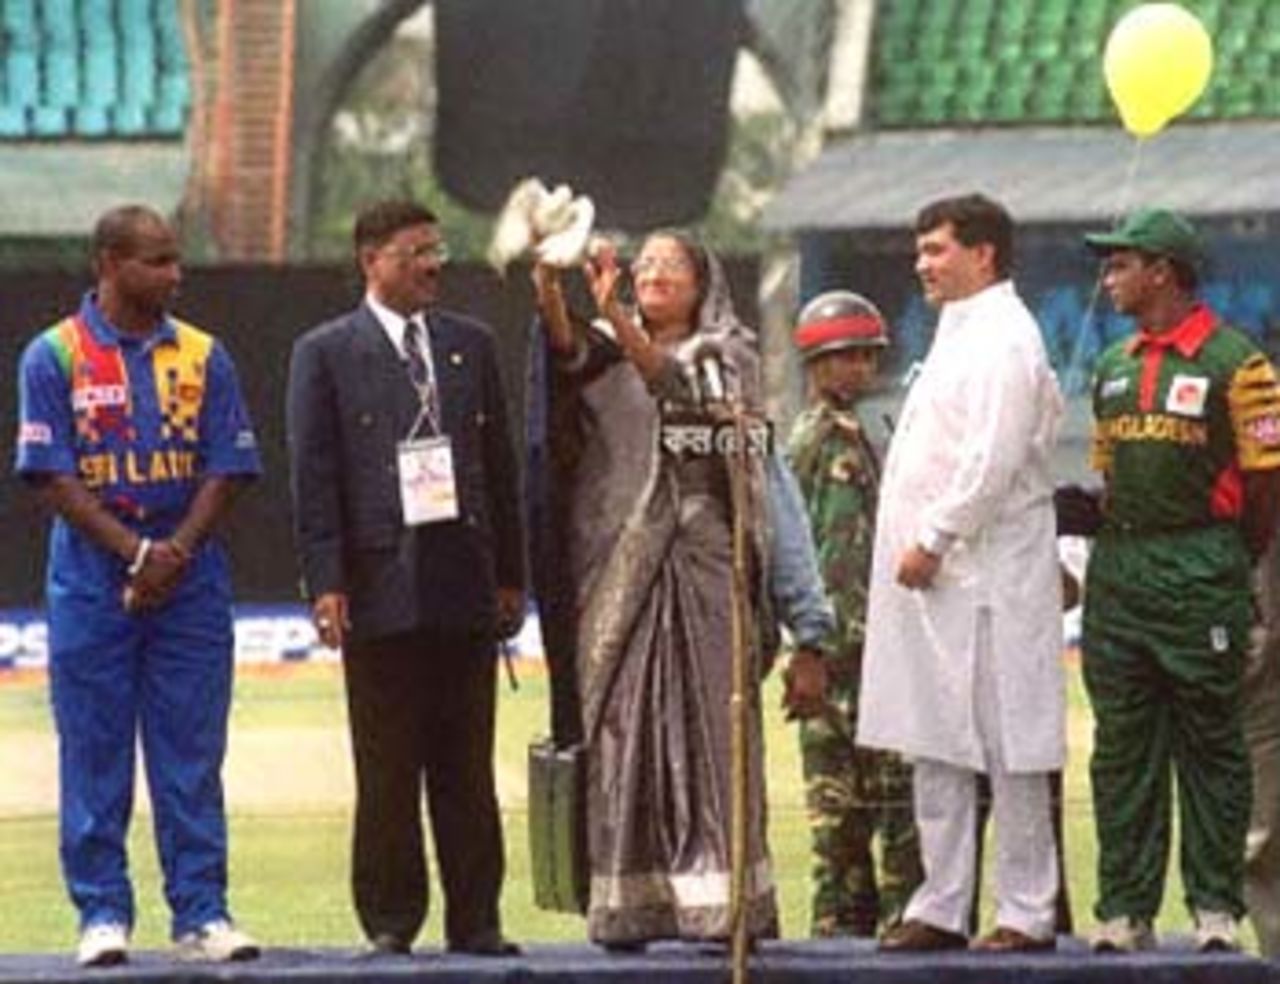 Bangladesh Prime Minister Sheikh Hasina Wajed (C) releases a dove to inaugurate the four-nation Asia Cup limited-overs tournament at the Bangabandhu National Stadium on 29 May 2000. Extreme left is Sri Lanka's captain Sanath Jayasuriya and extreme right is Bangladesh skipper Aminul Islam. India and Pakistan are the other teams in the tournament to decide the regional one-day champions. Bangladesh v Sri Lanka, Asia Cup, 1999/00, Bangabandhu National Stadium, Dhaka 29 May 2000.